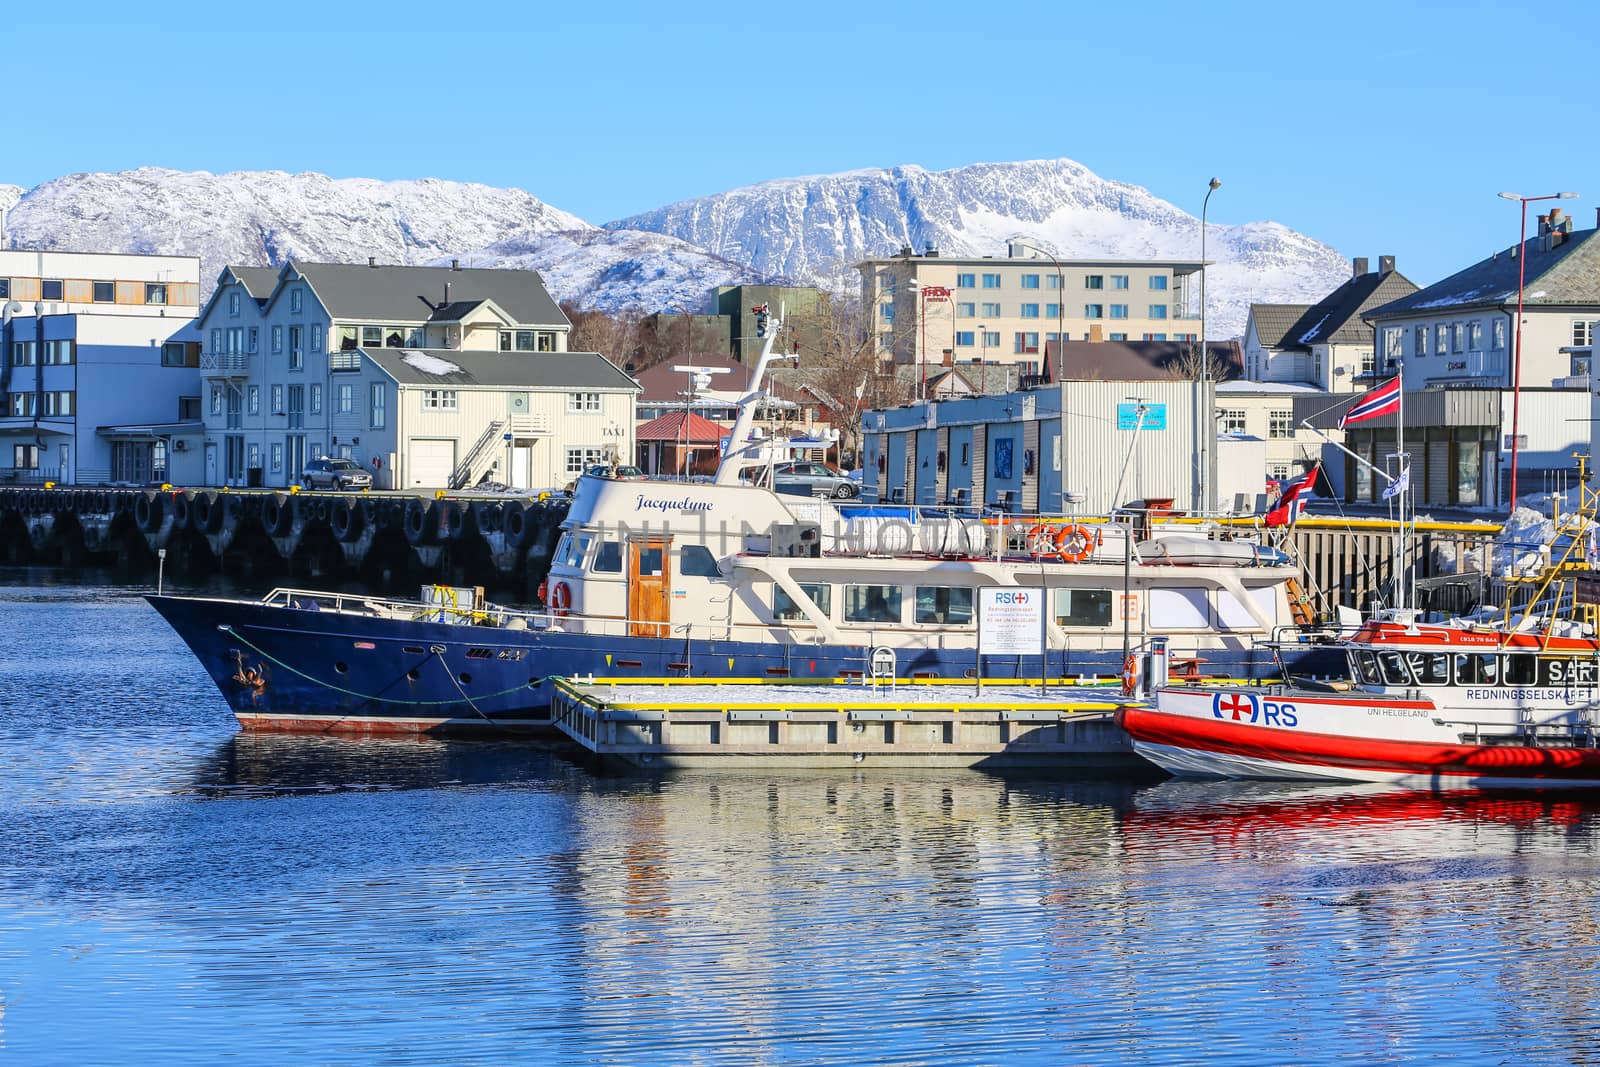 M / V Jacquelyne have the last 3 years been used for whale watching and charter for groups from 15 to 50 guests in Northern Norway, based 
M/V Jacquelyne